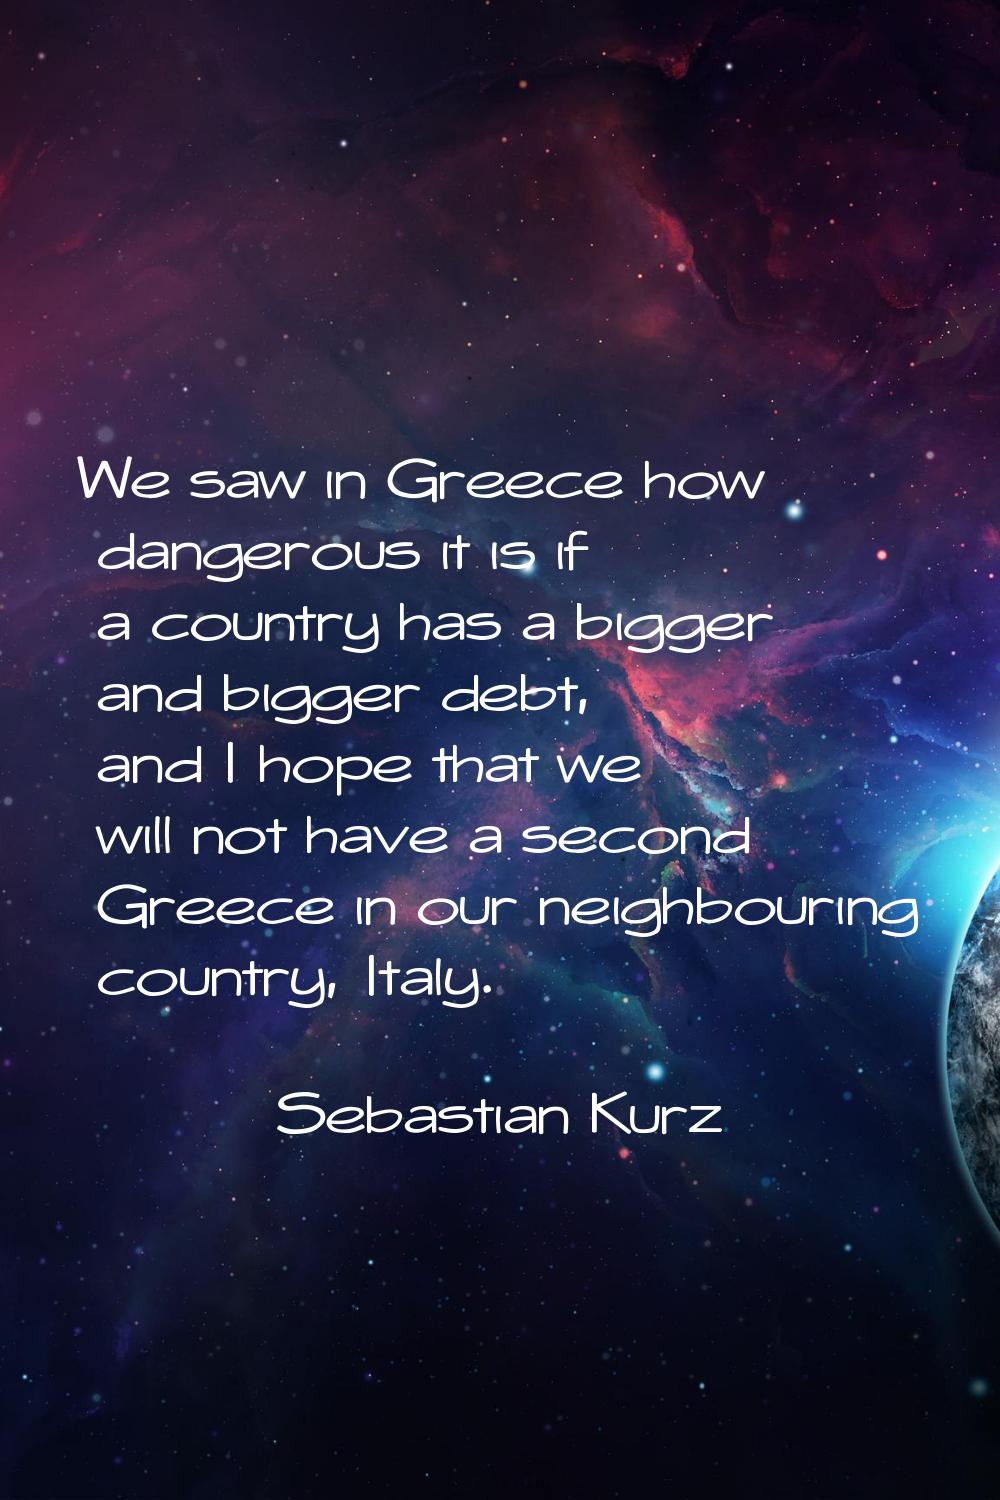 We saw in Greece how dangerous it is if a country has a bigger and bigger debt, and I hope that we 